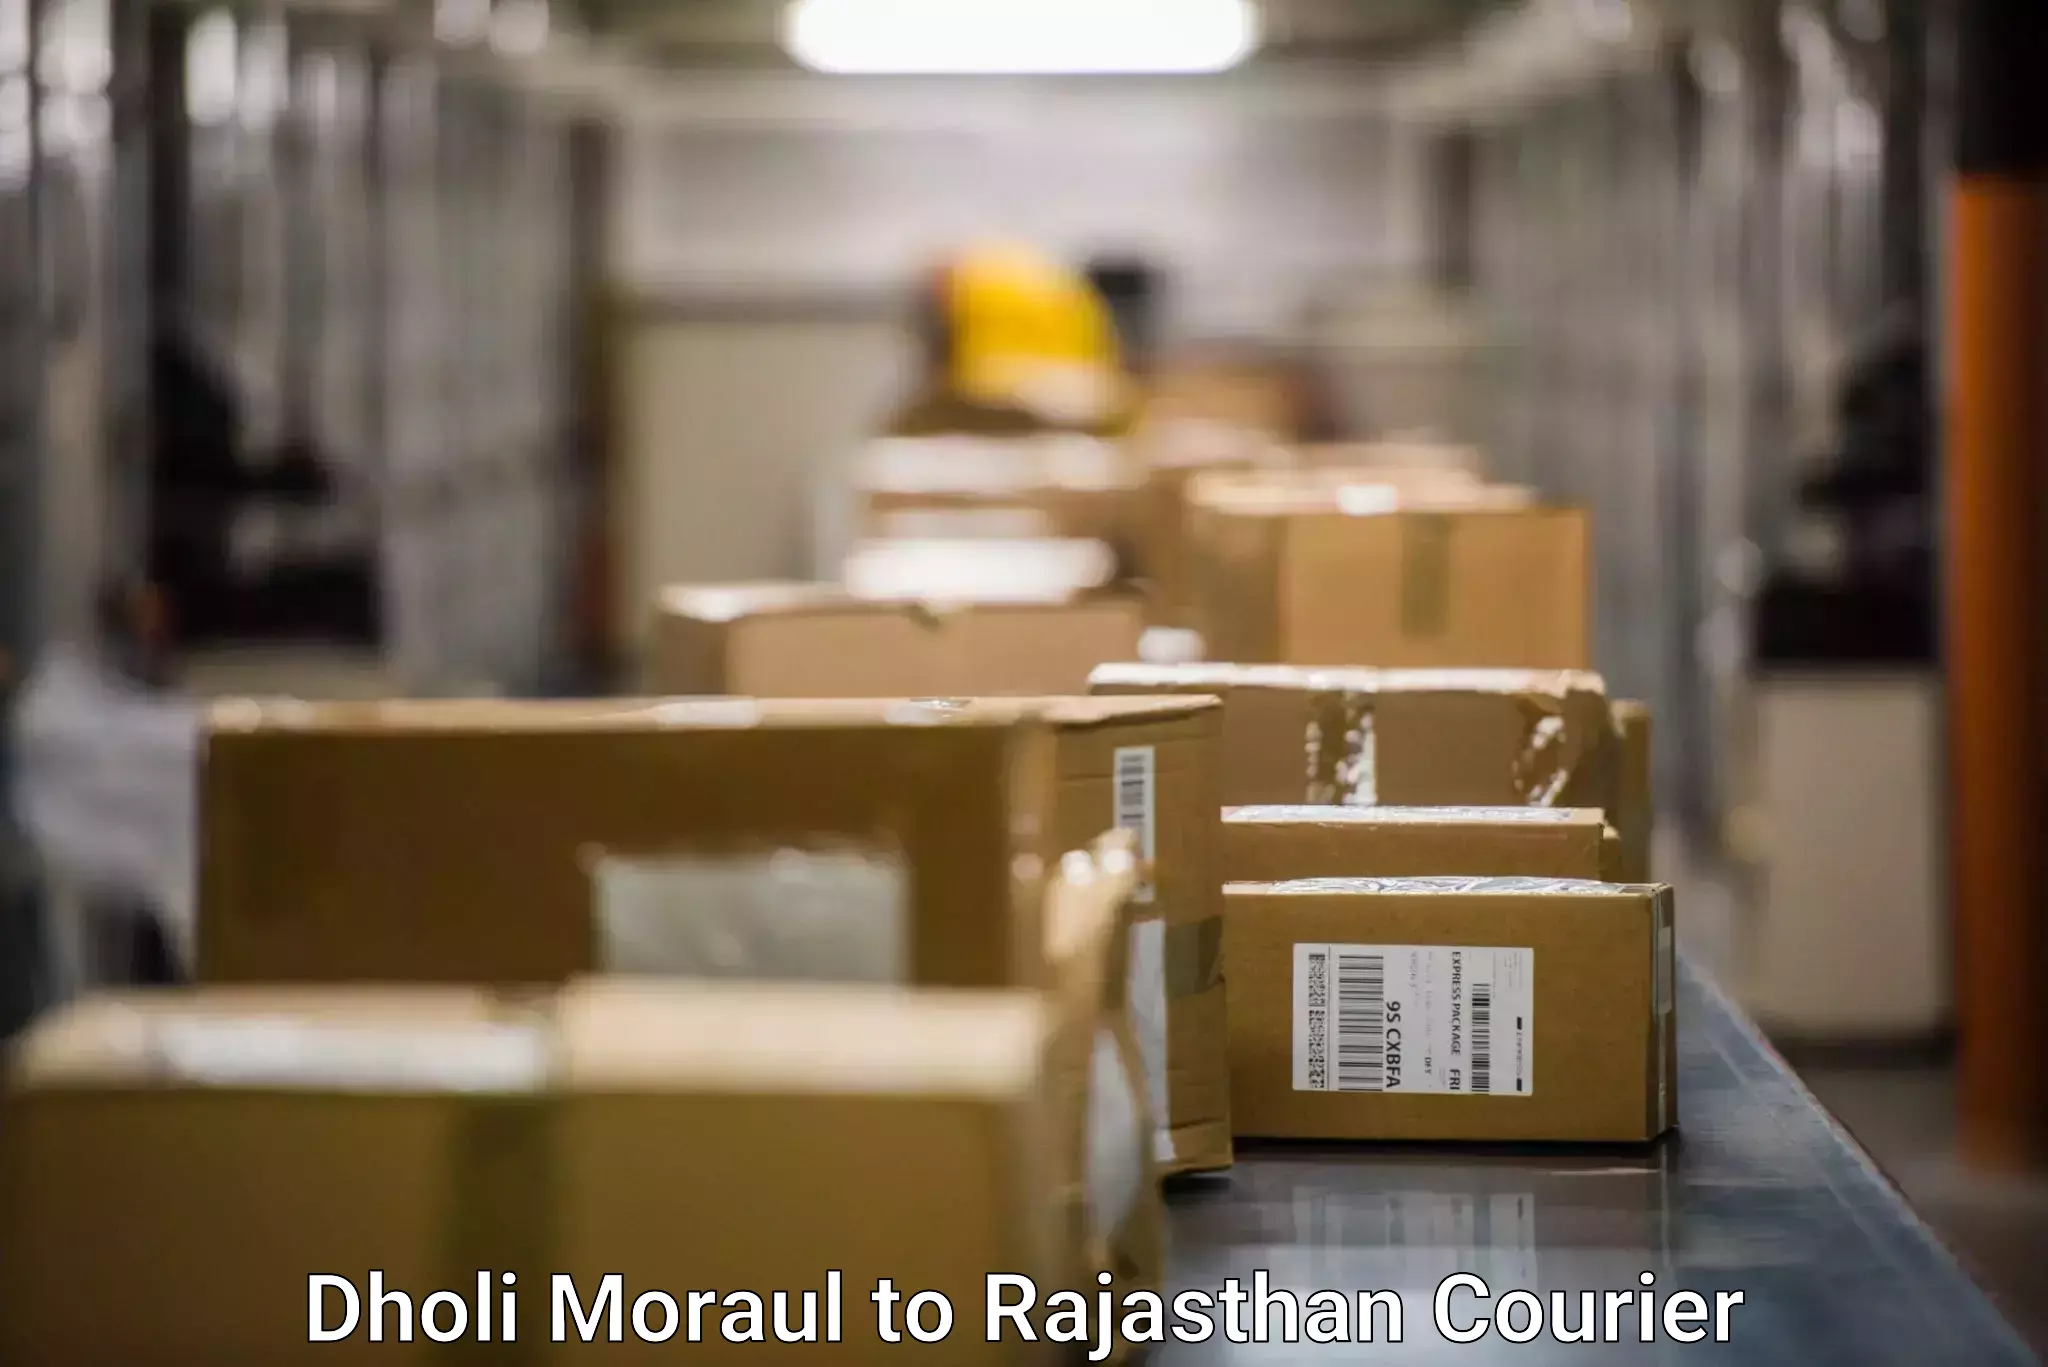 Parcel delivery automation Dholi Moraul to Tibbi